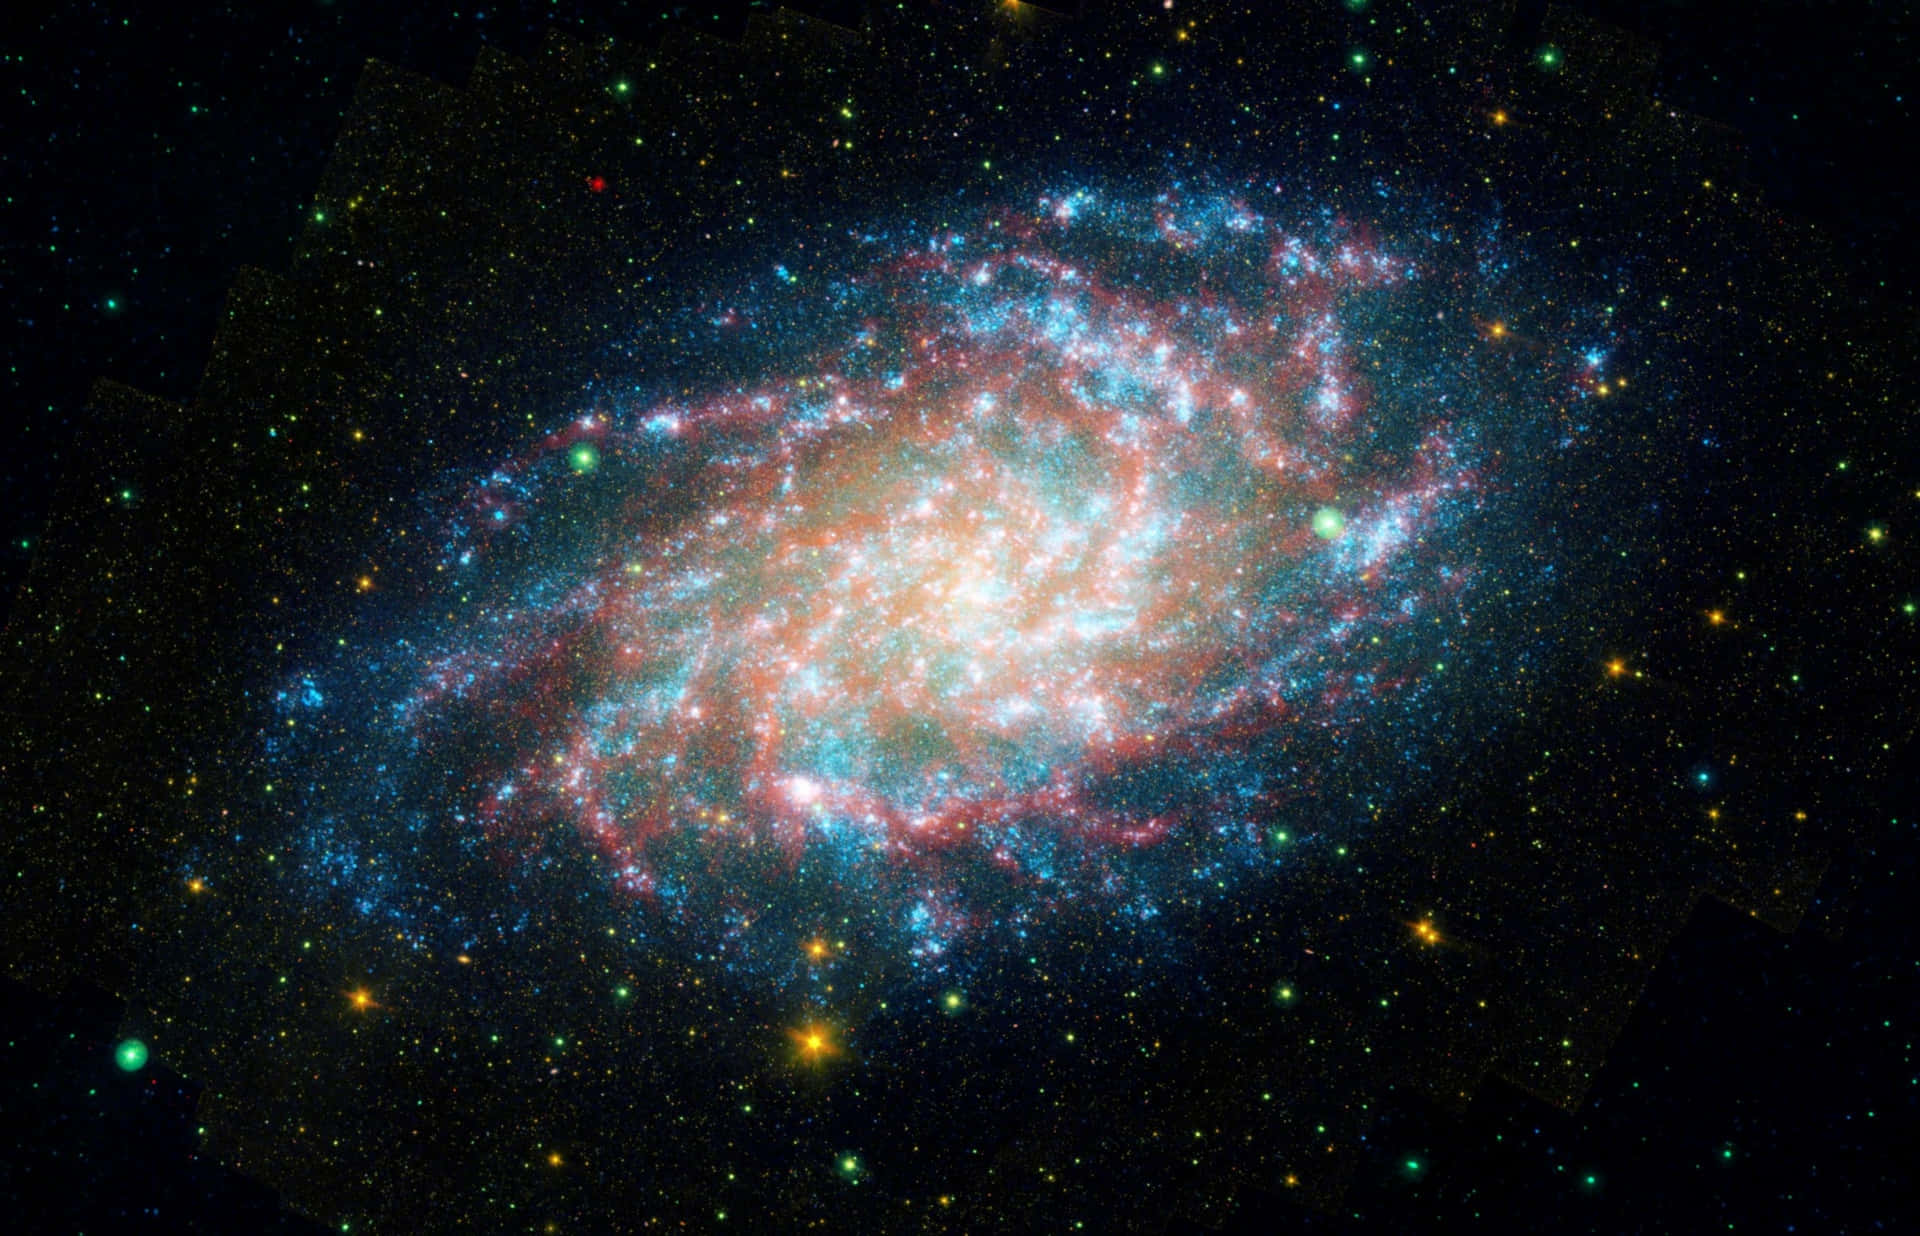 Take a journey across the stars with this otherworldly NASA Galaxy Picture.